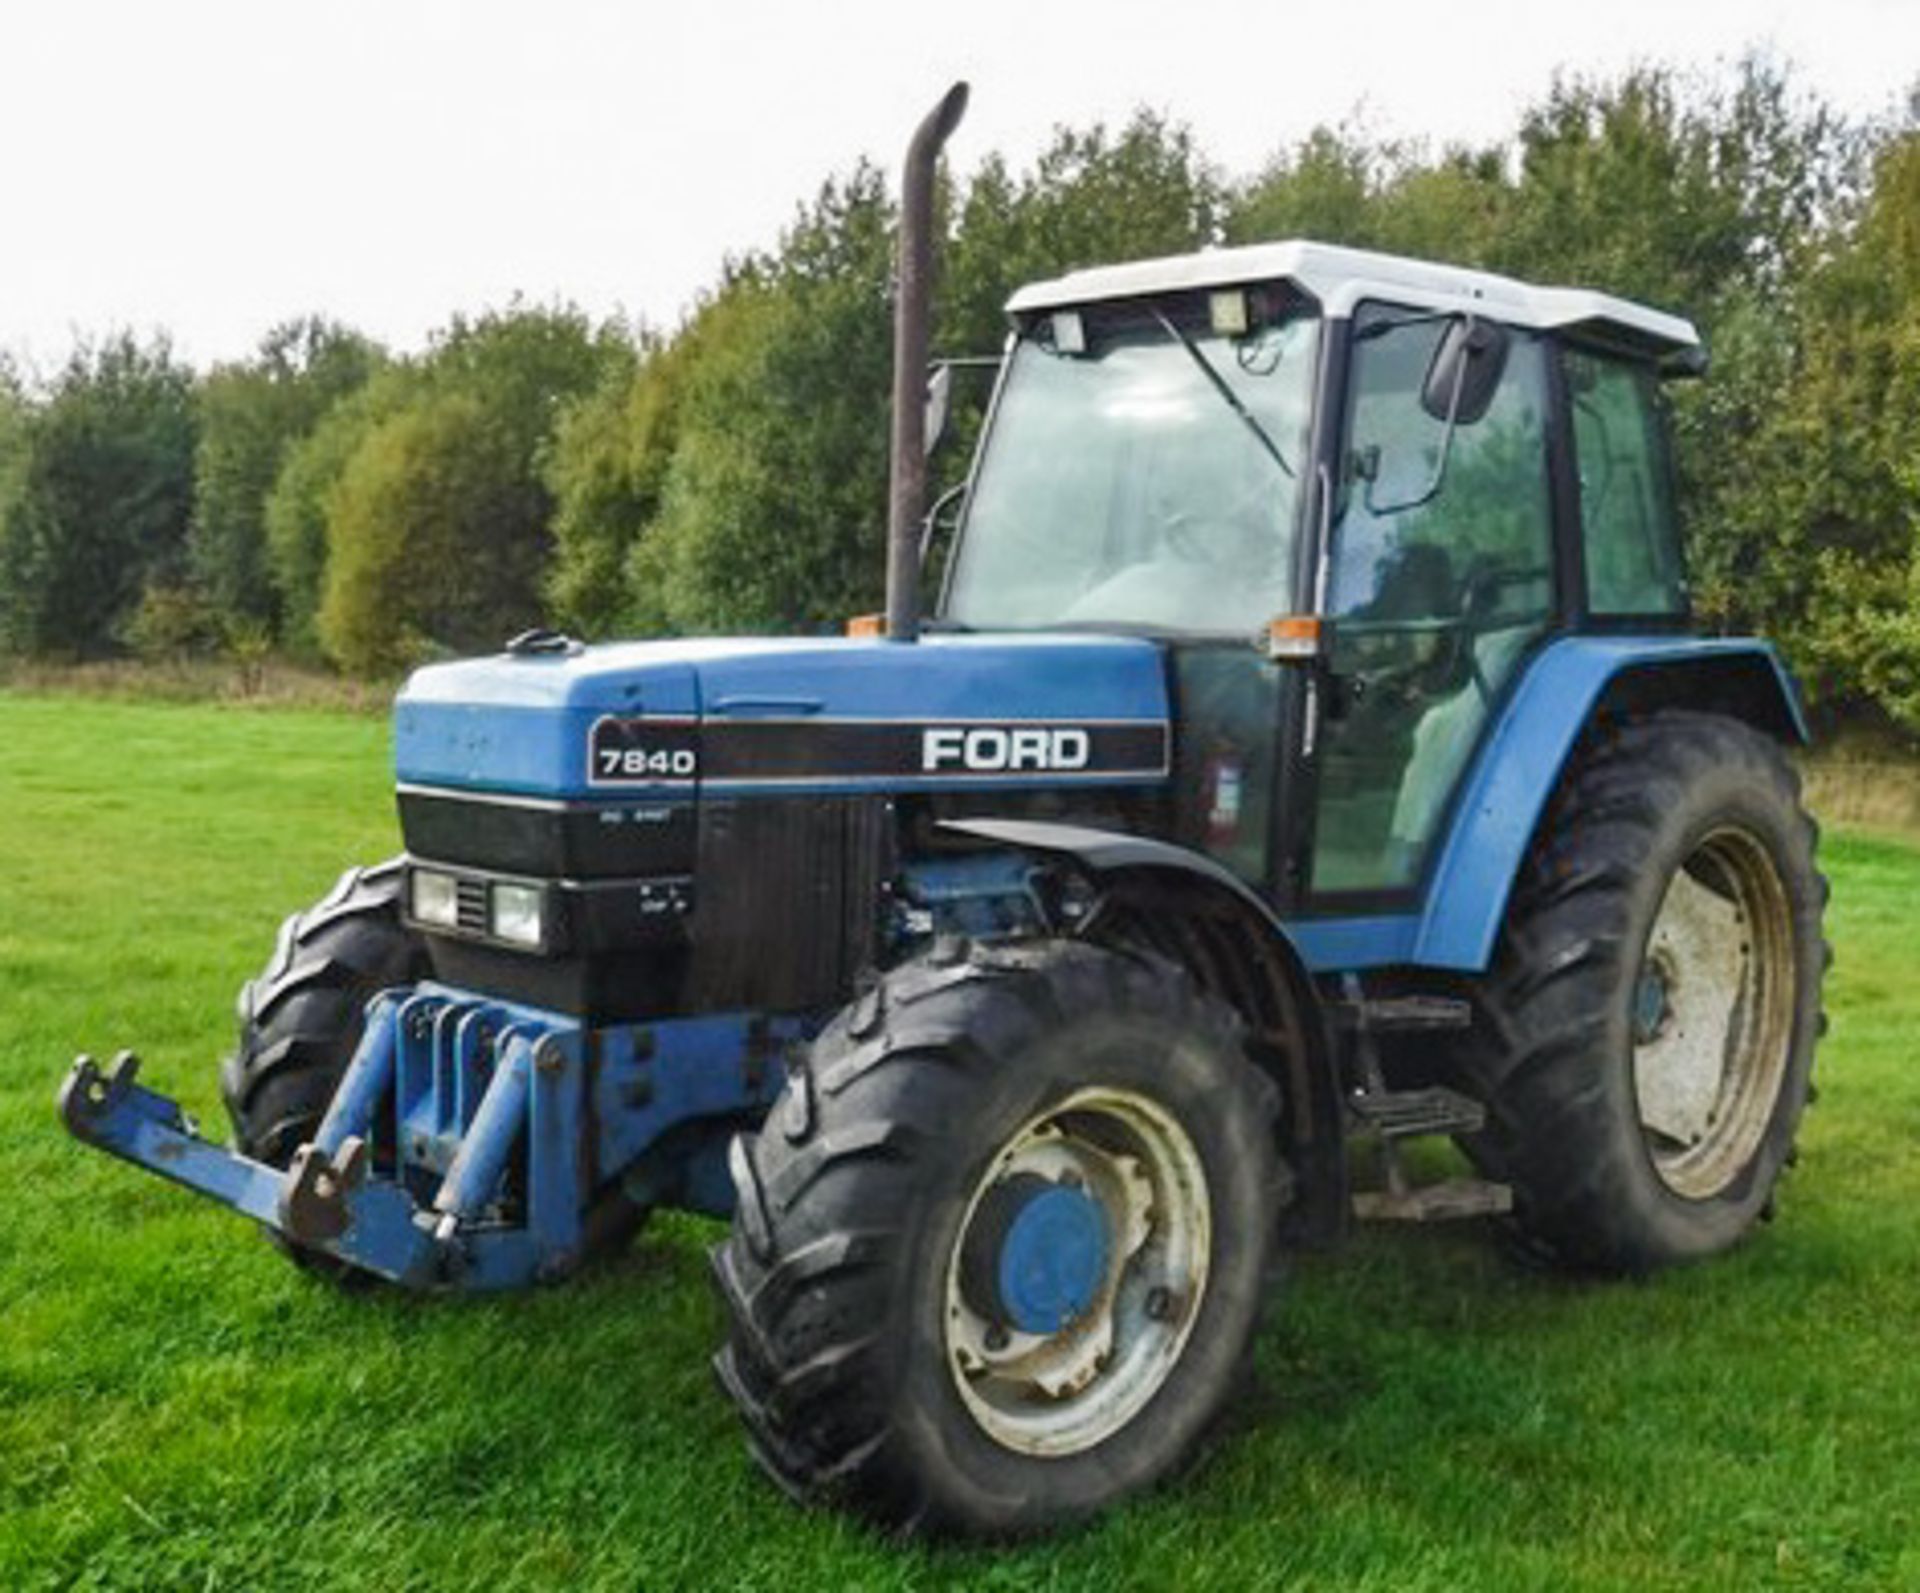 FORD 7840, REG L881PES, S/N 13053573, 13531HRS (NOT VERIFIED) CLOCK INOP, FRONT LINKAGE FITTED BY OW